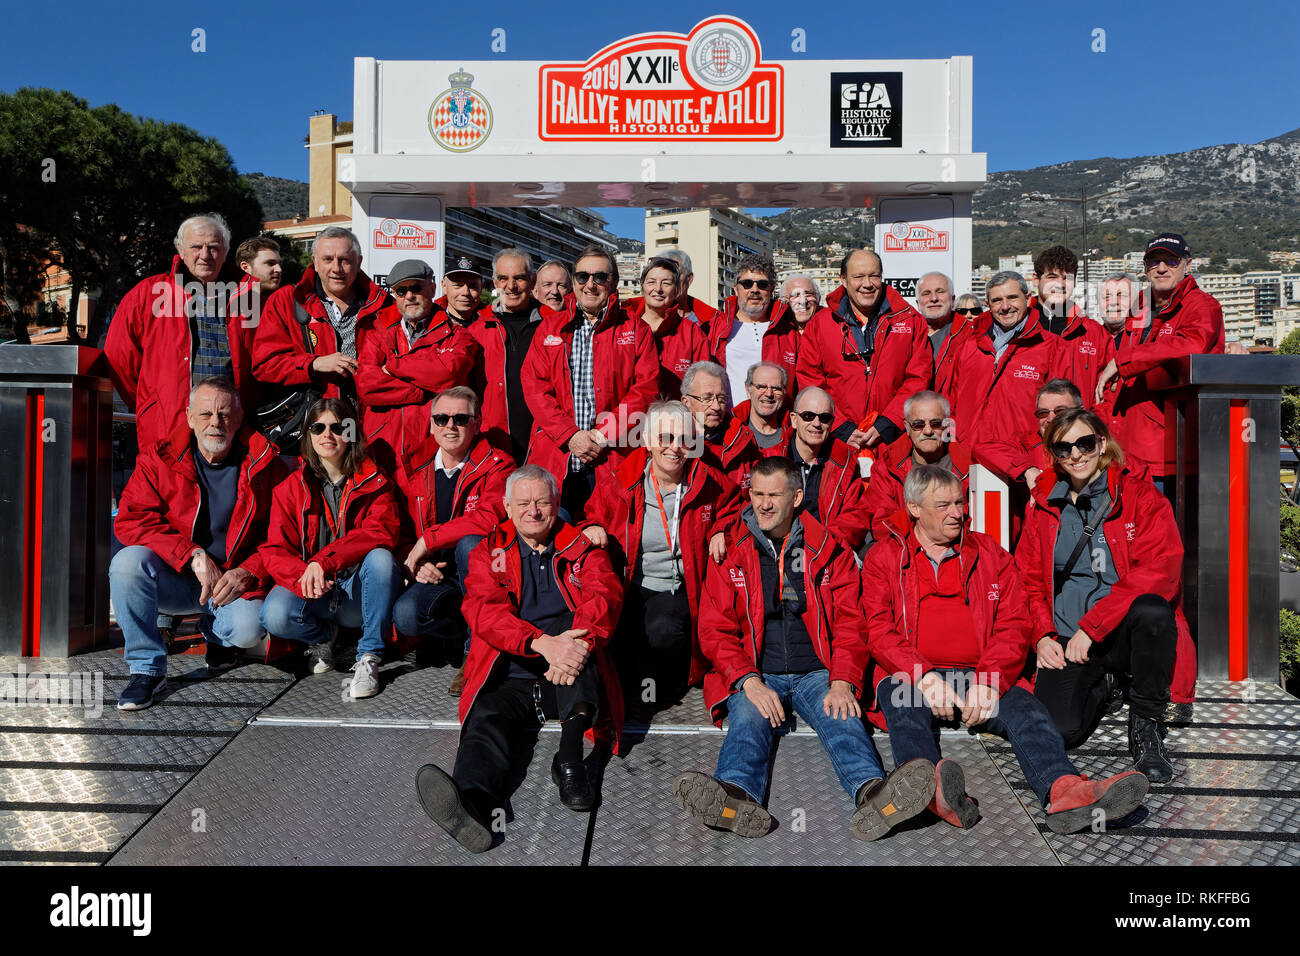 MONACO, FRANCE, February 6, 2019 : Team on the podium. Rallye Historique is reserved to those cars which have participated in the Rallye Monte-Carlo b Stock Photo